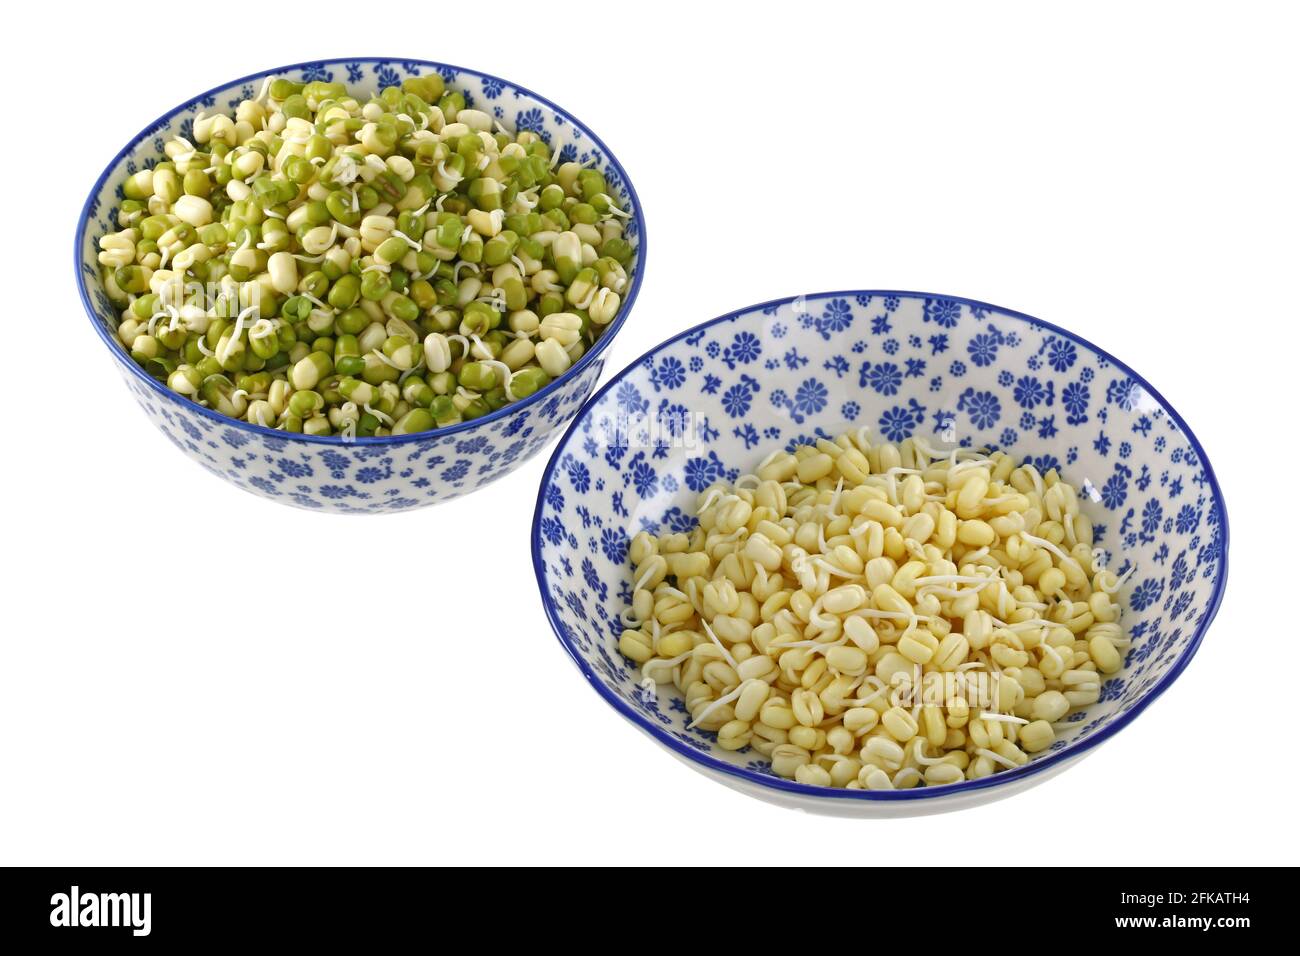 Bowls of Mung Bean Green gram Sprouts with and without green skins Stock Photo